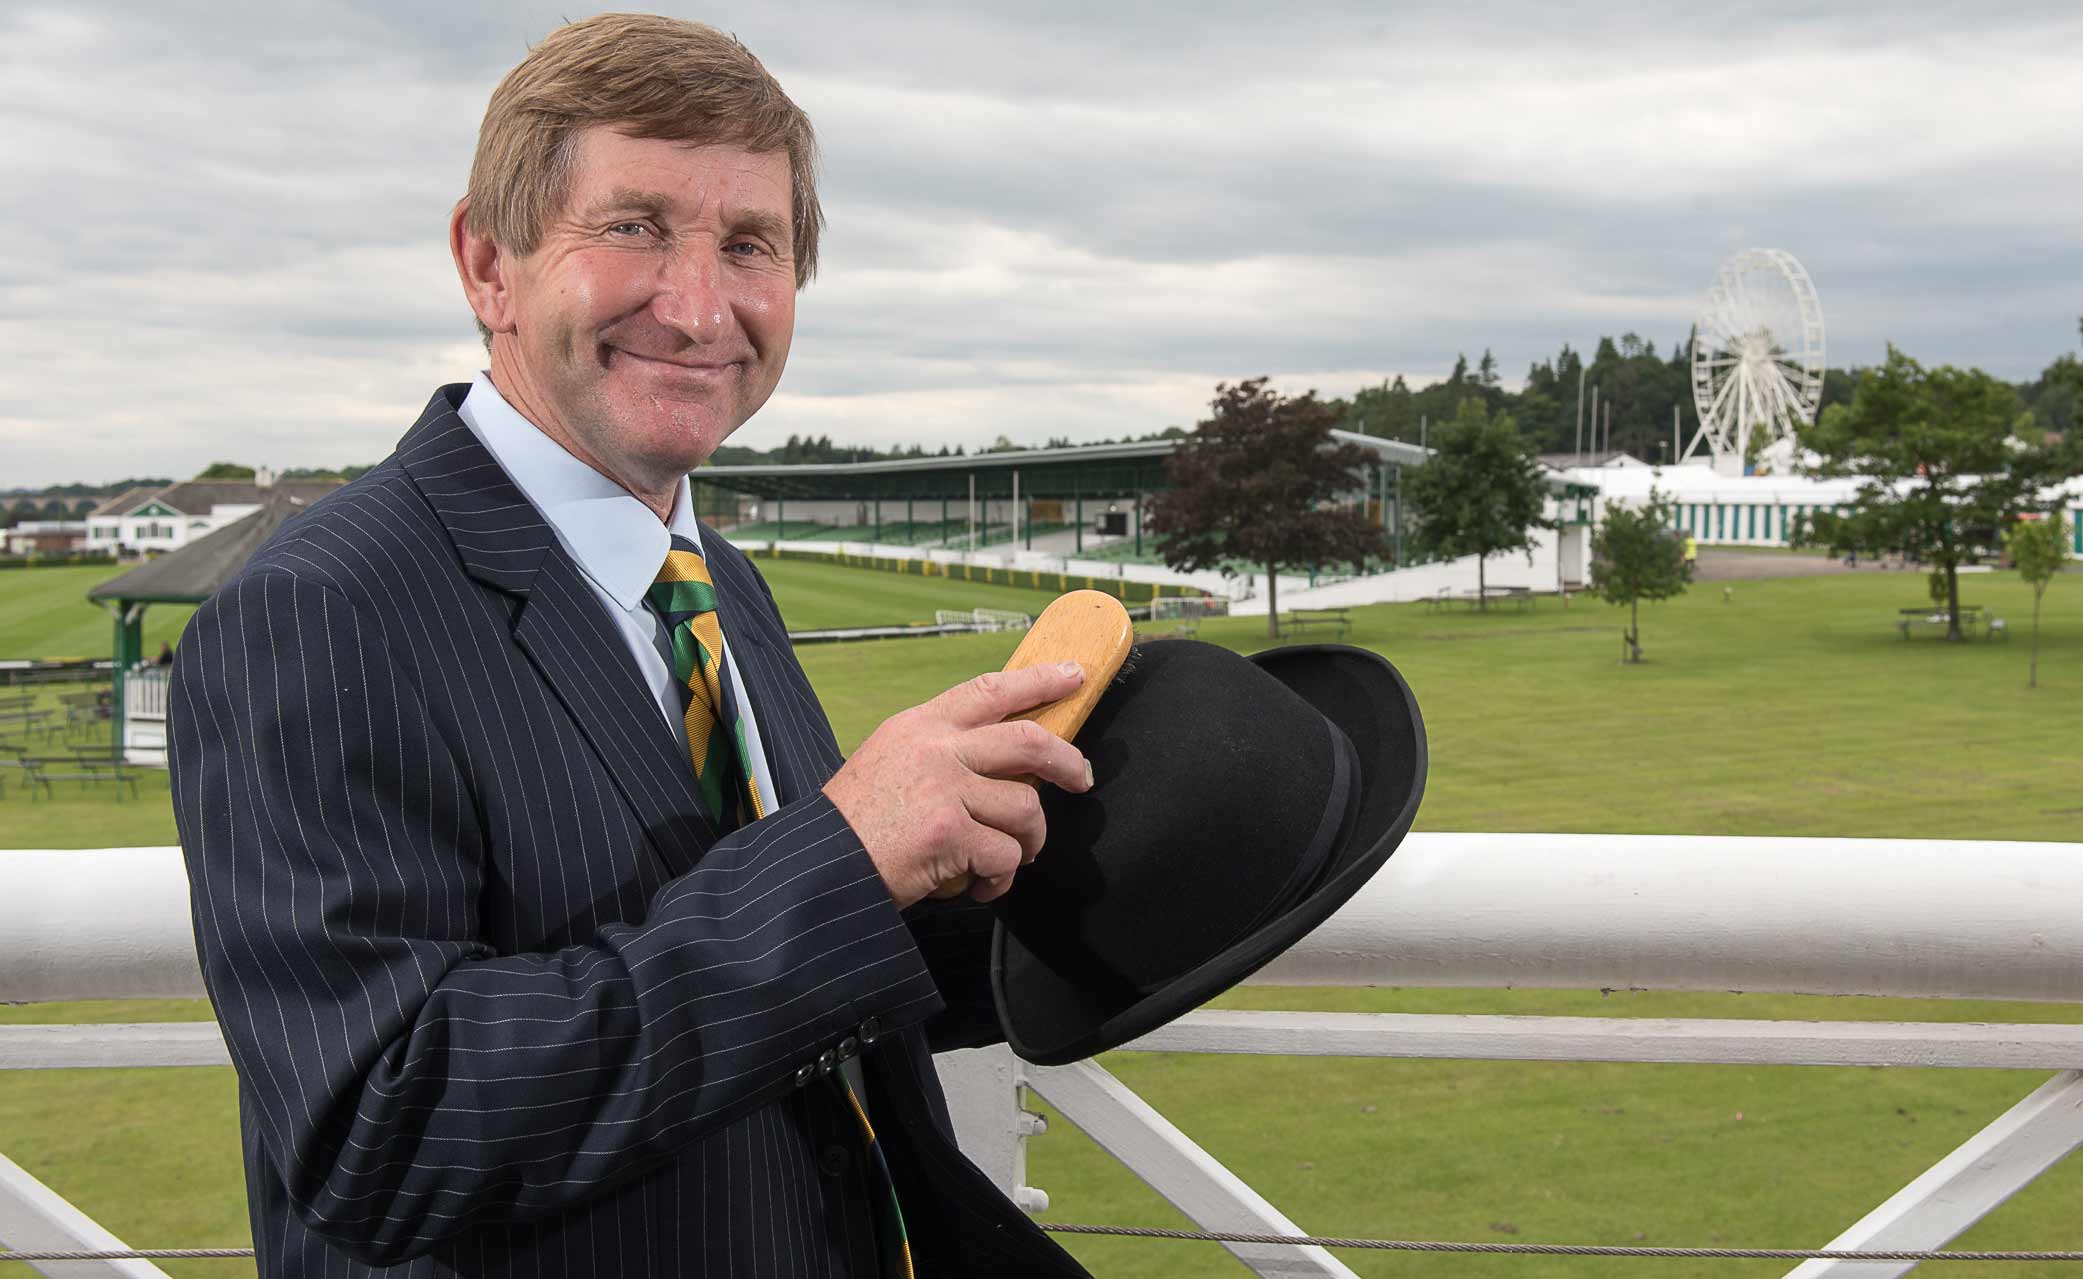 Show Director Charles Mills is busy preparing for his first year at the helm of the Great Yorkshire Show